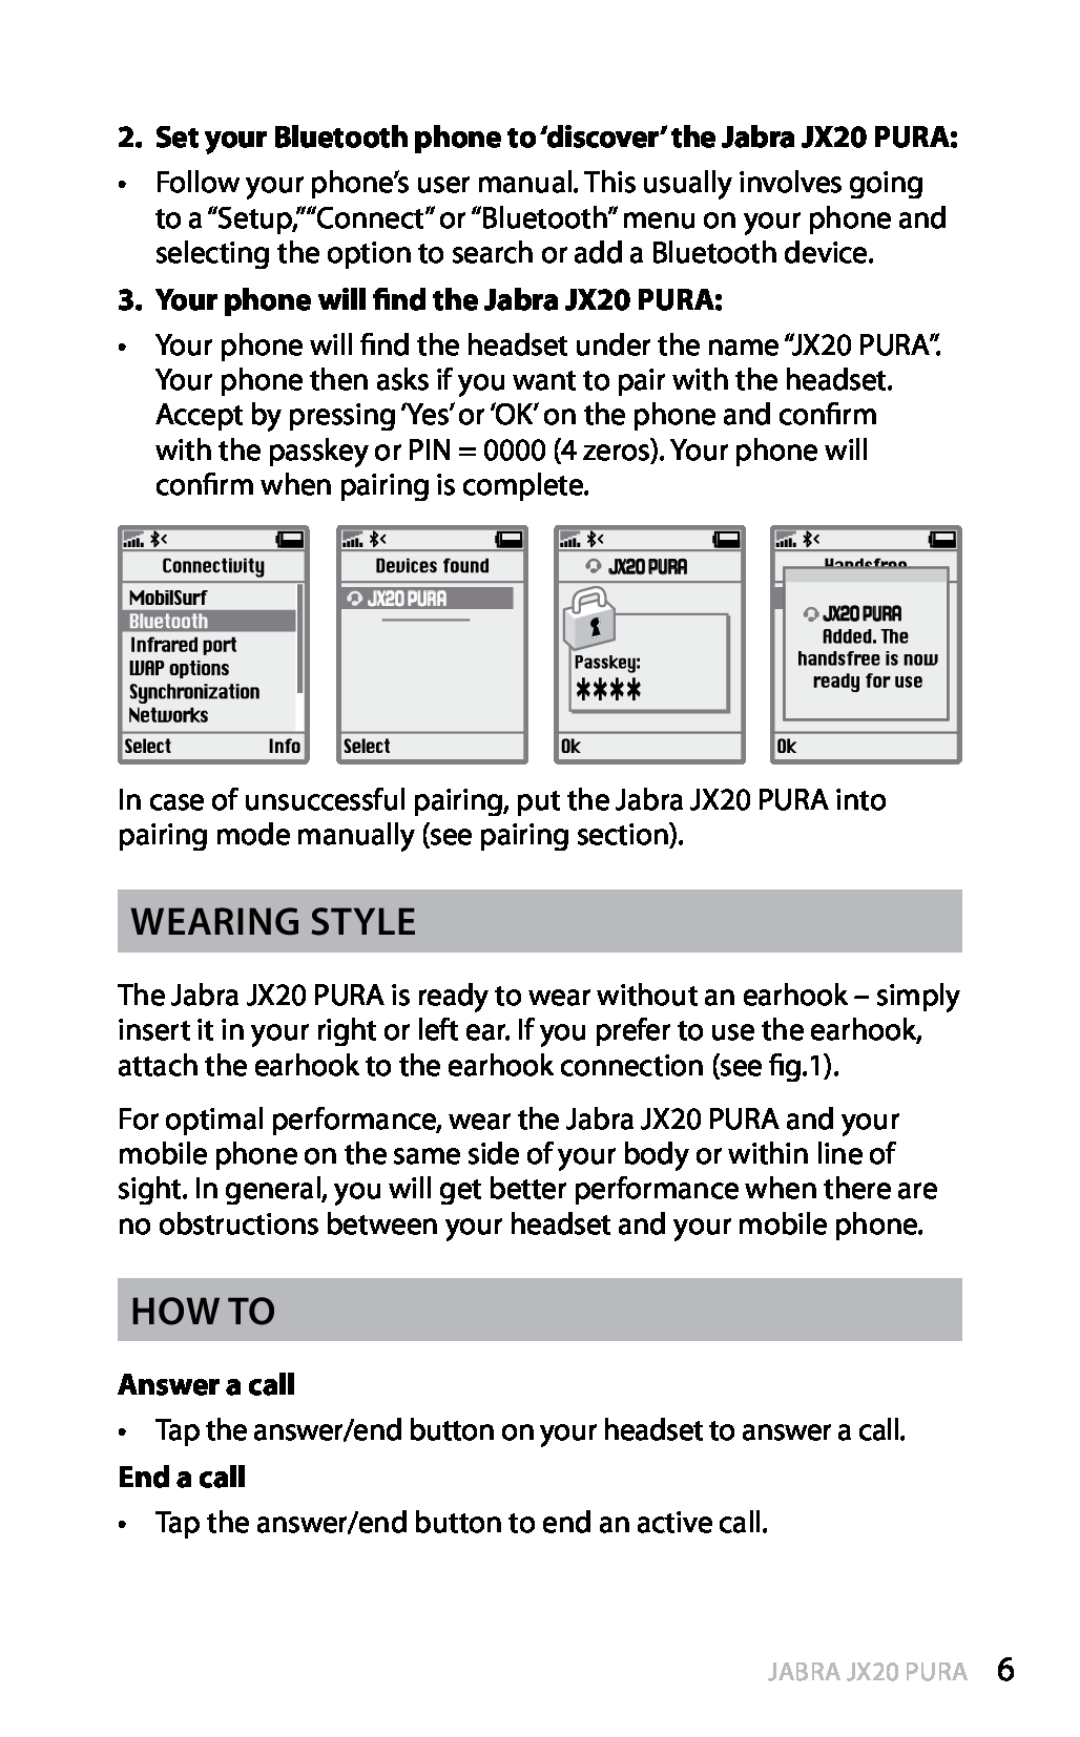 Jabra manual Wearing style, How to, Your phone will find the Jabra JX20 PURA, Answer a call, End a call, english 